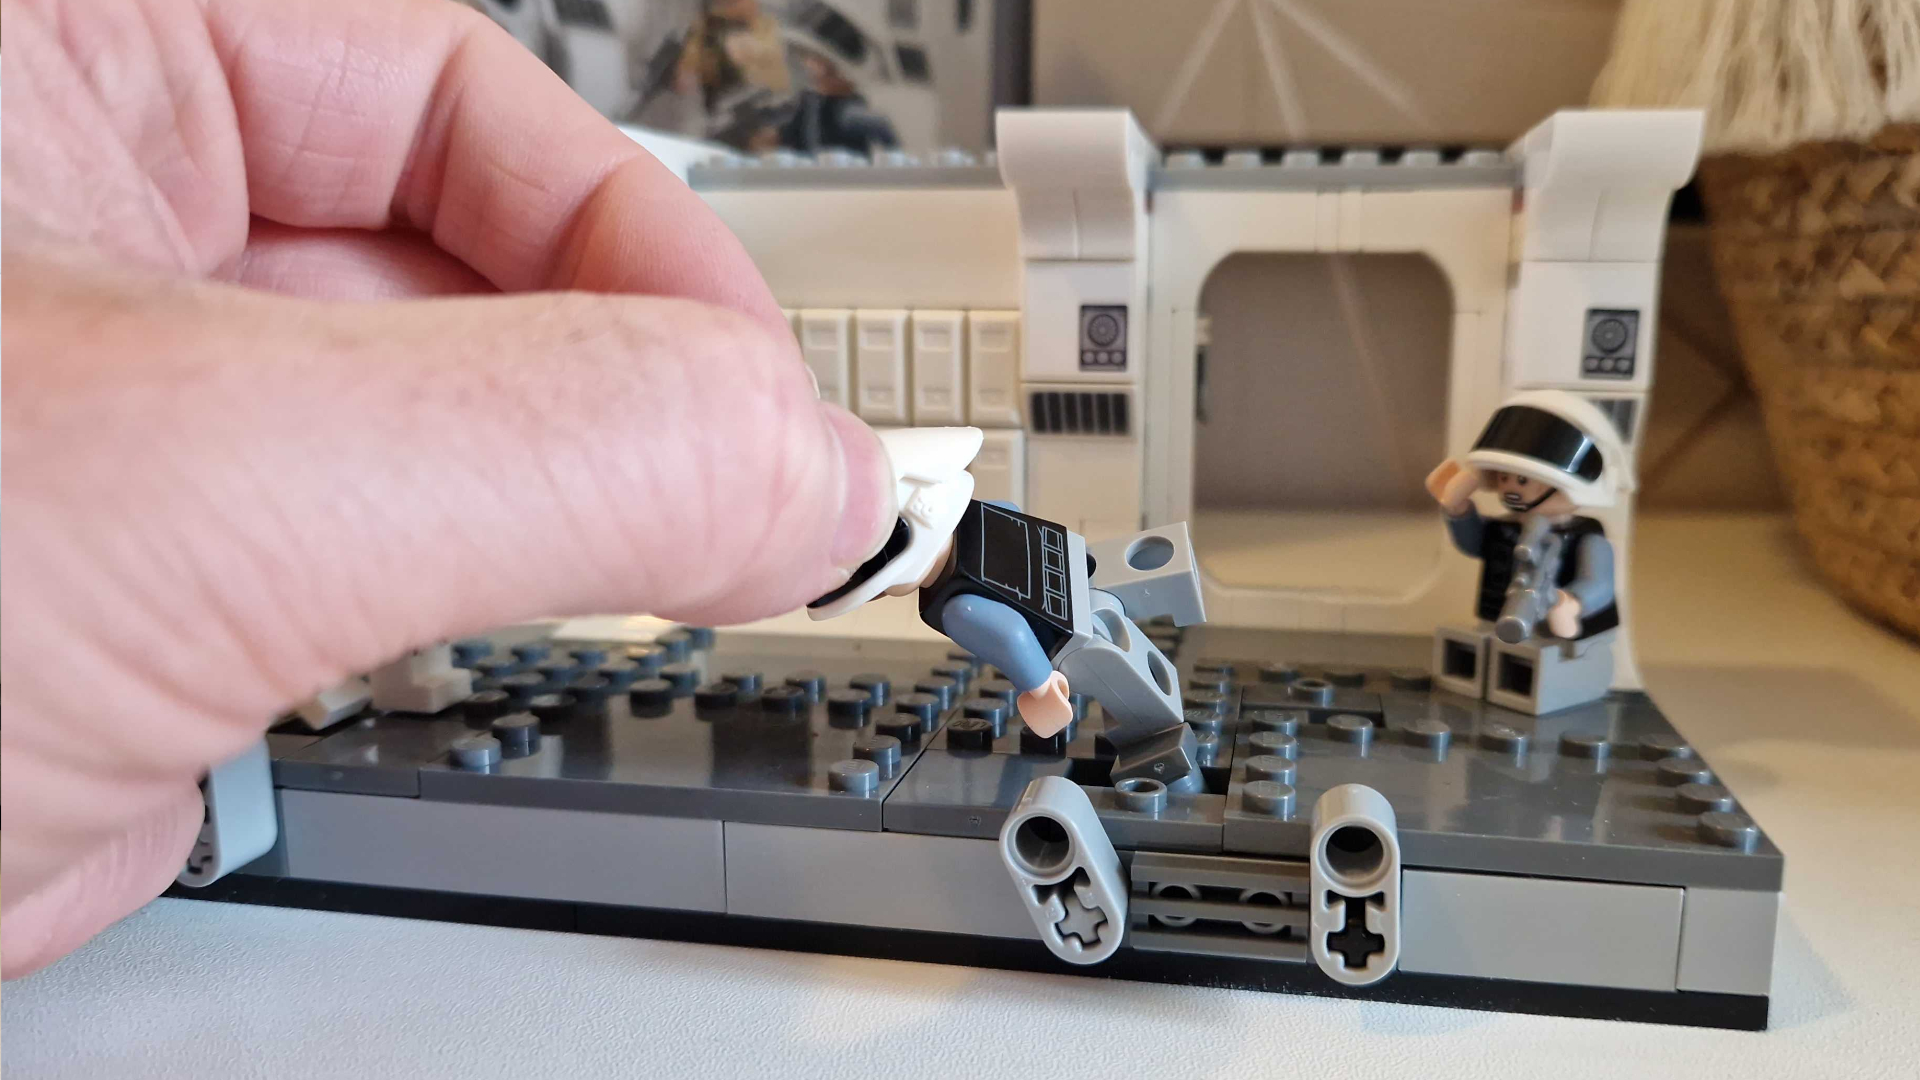 A minifigure falling over in the Lego Boarding the Tantive IV set